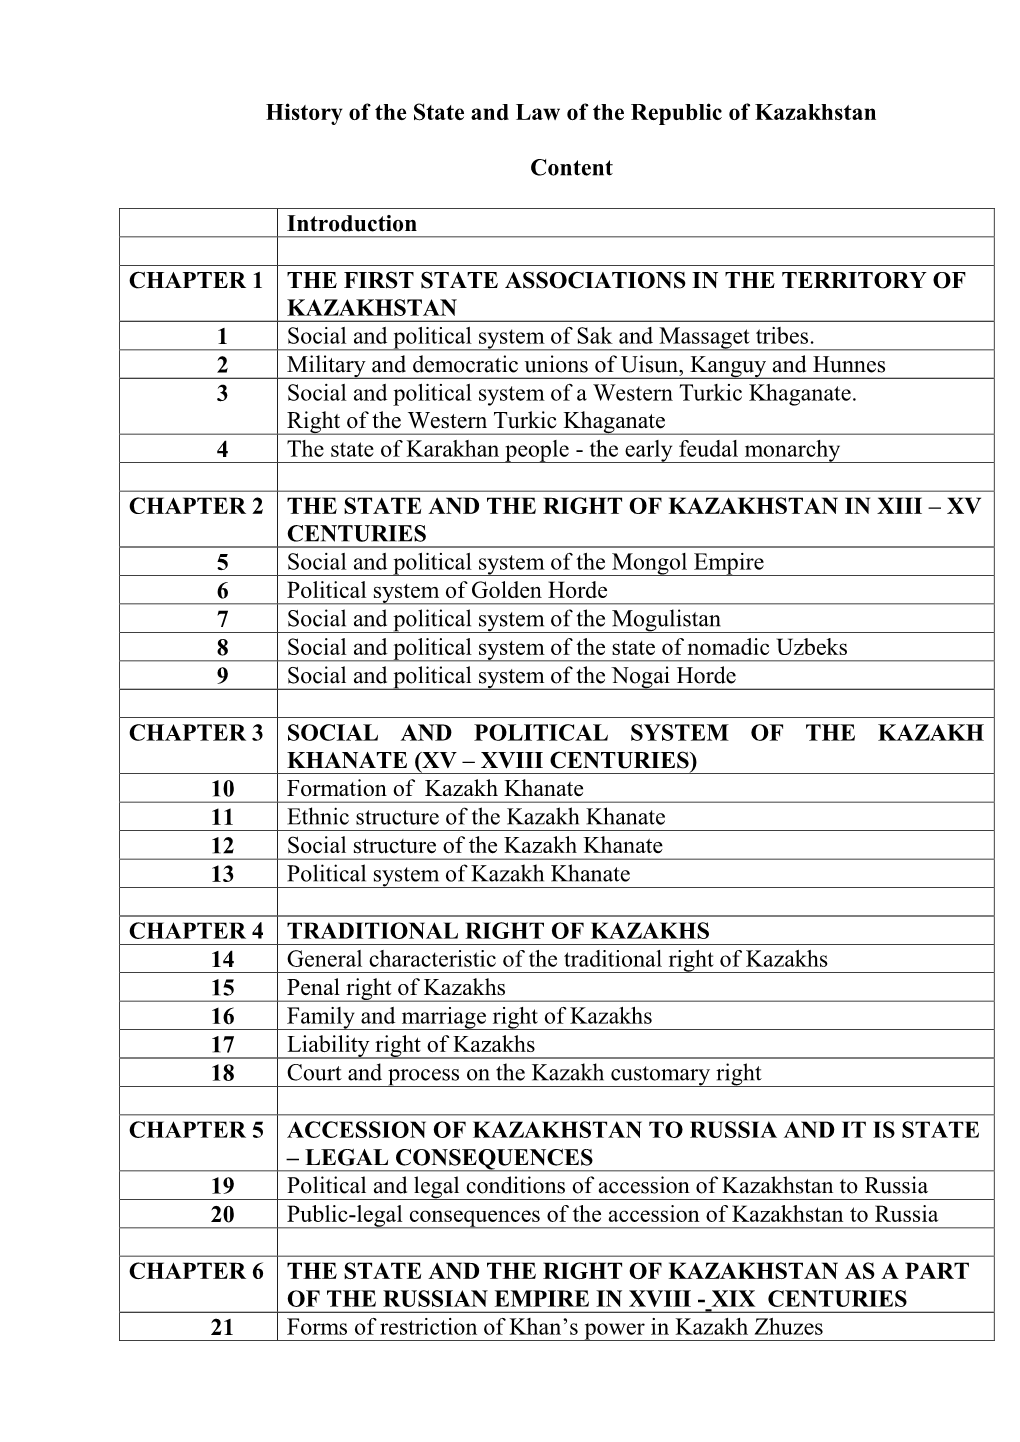 History of the State and Law of the Republic of Kazakhstan Content